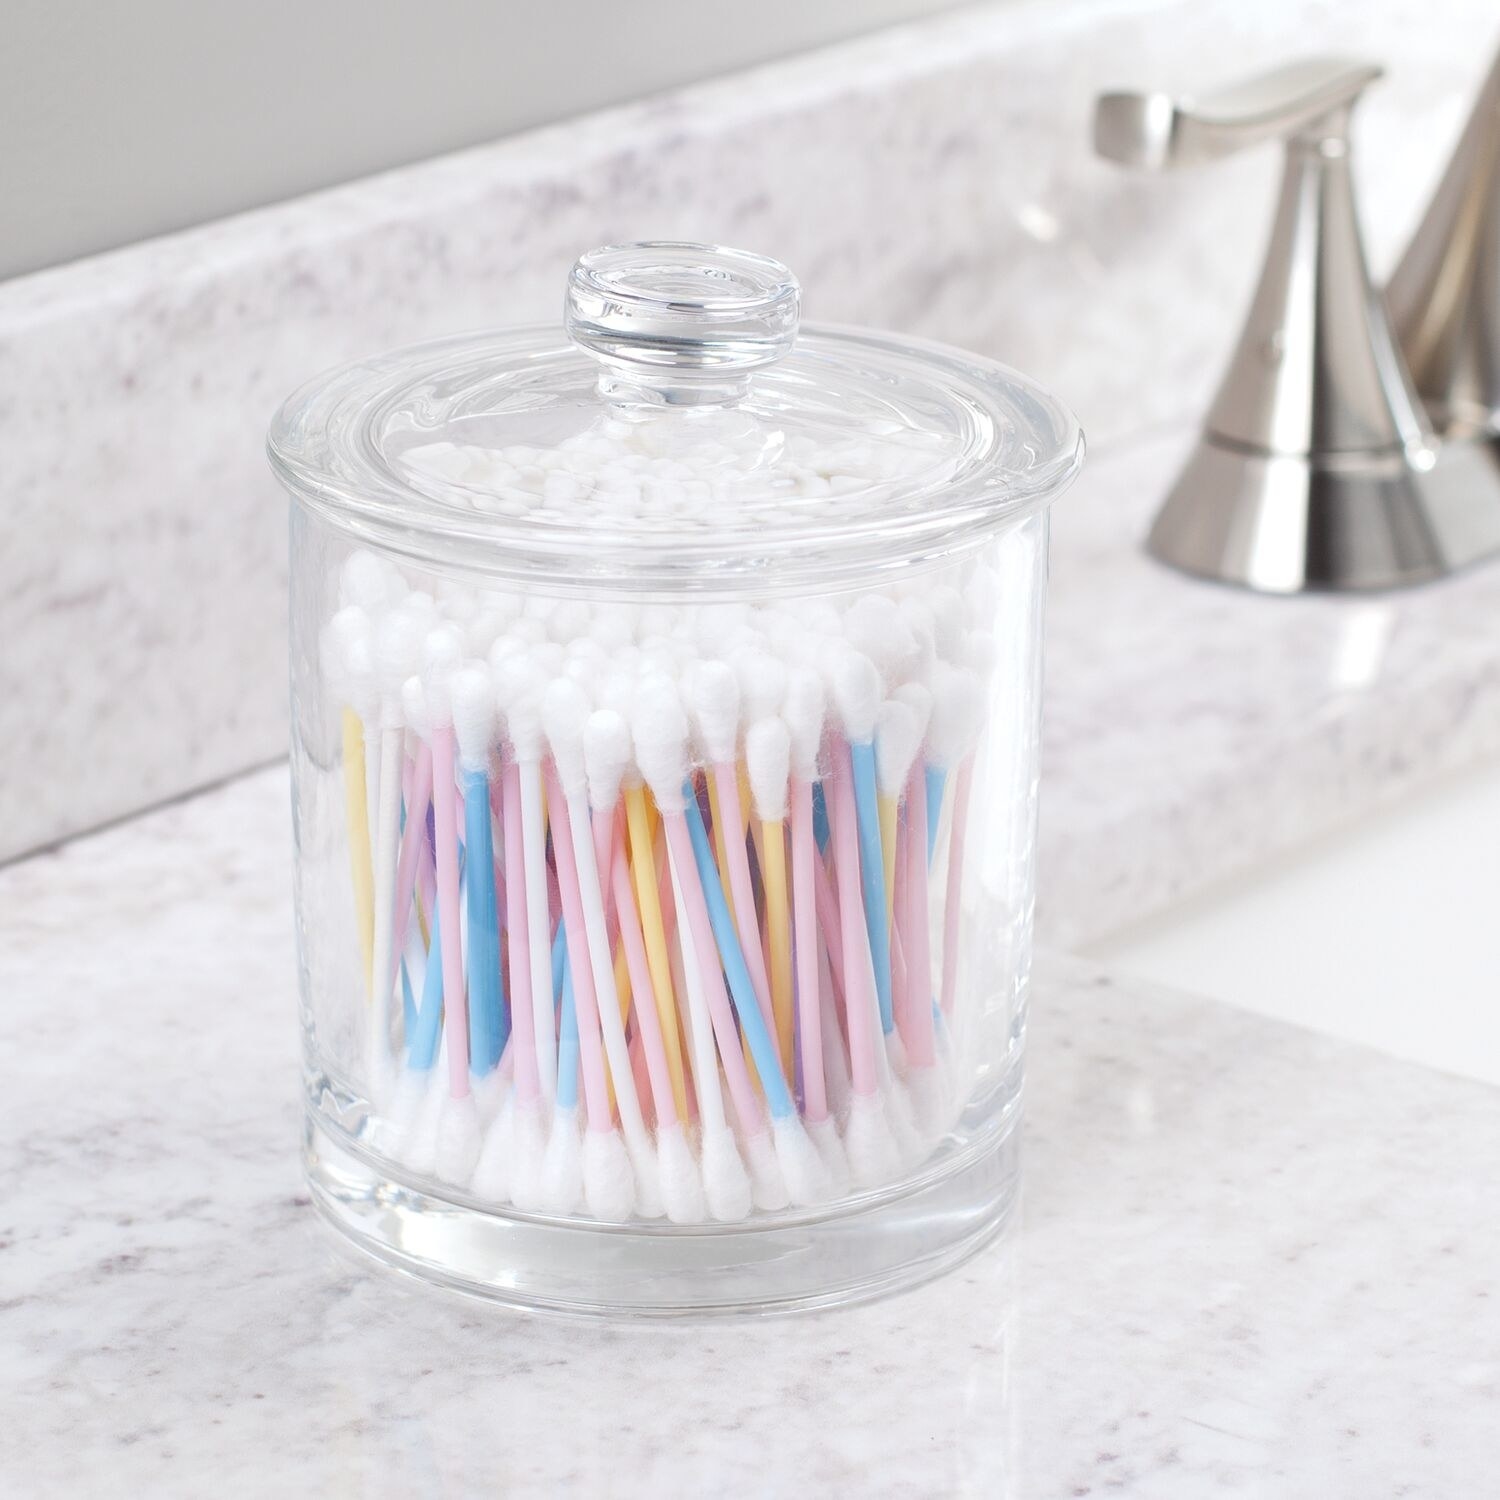 The glass vanity jar filled with cotton swabs